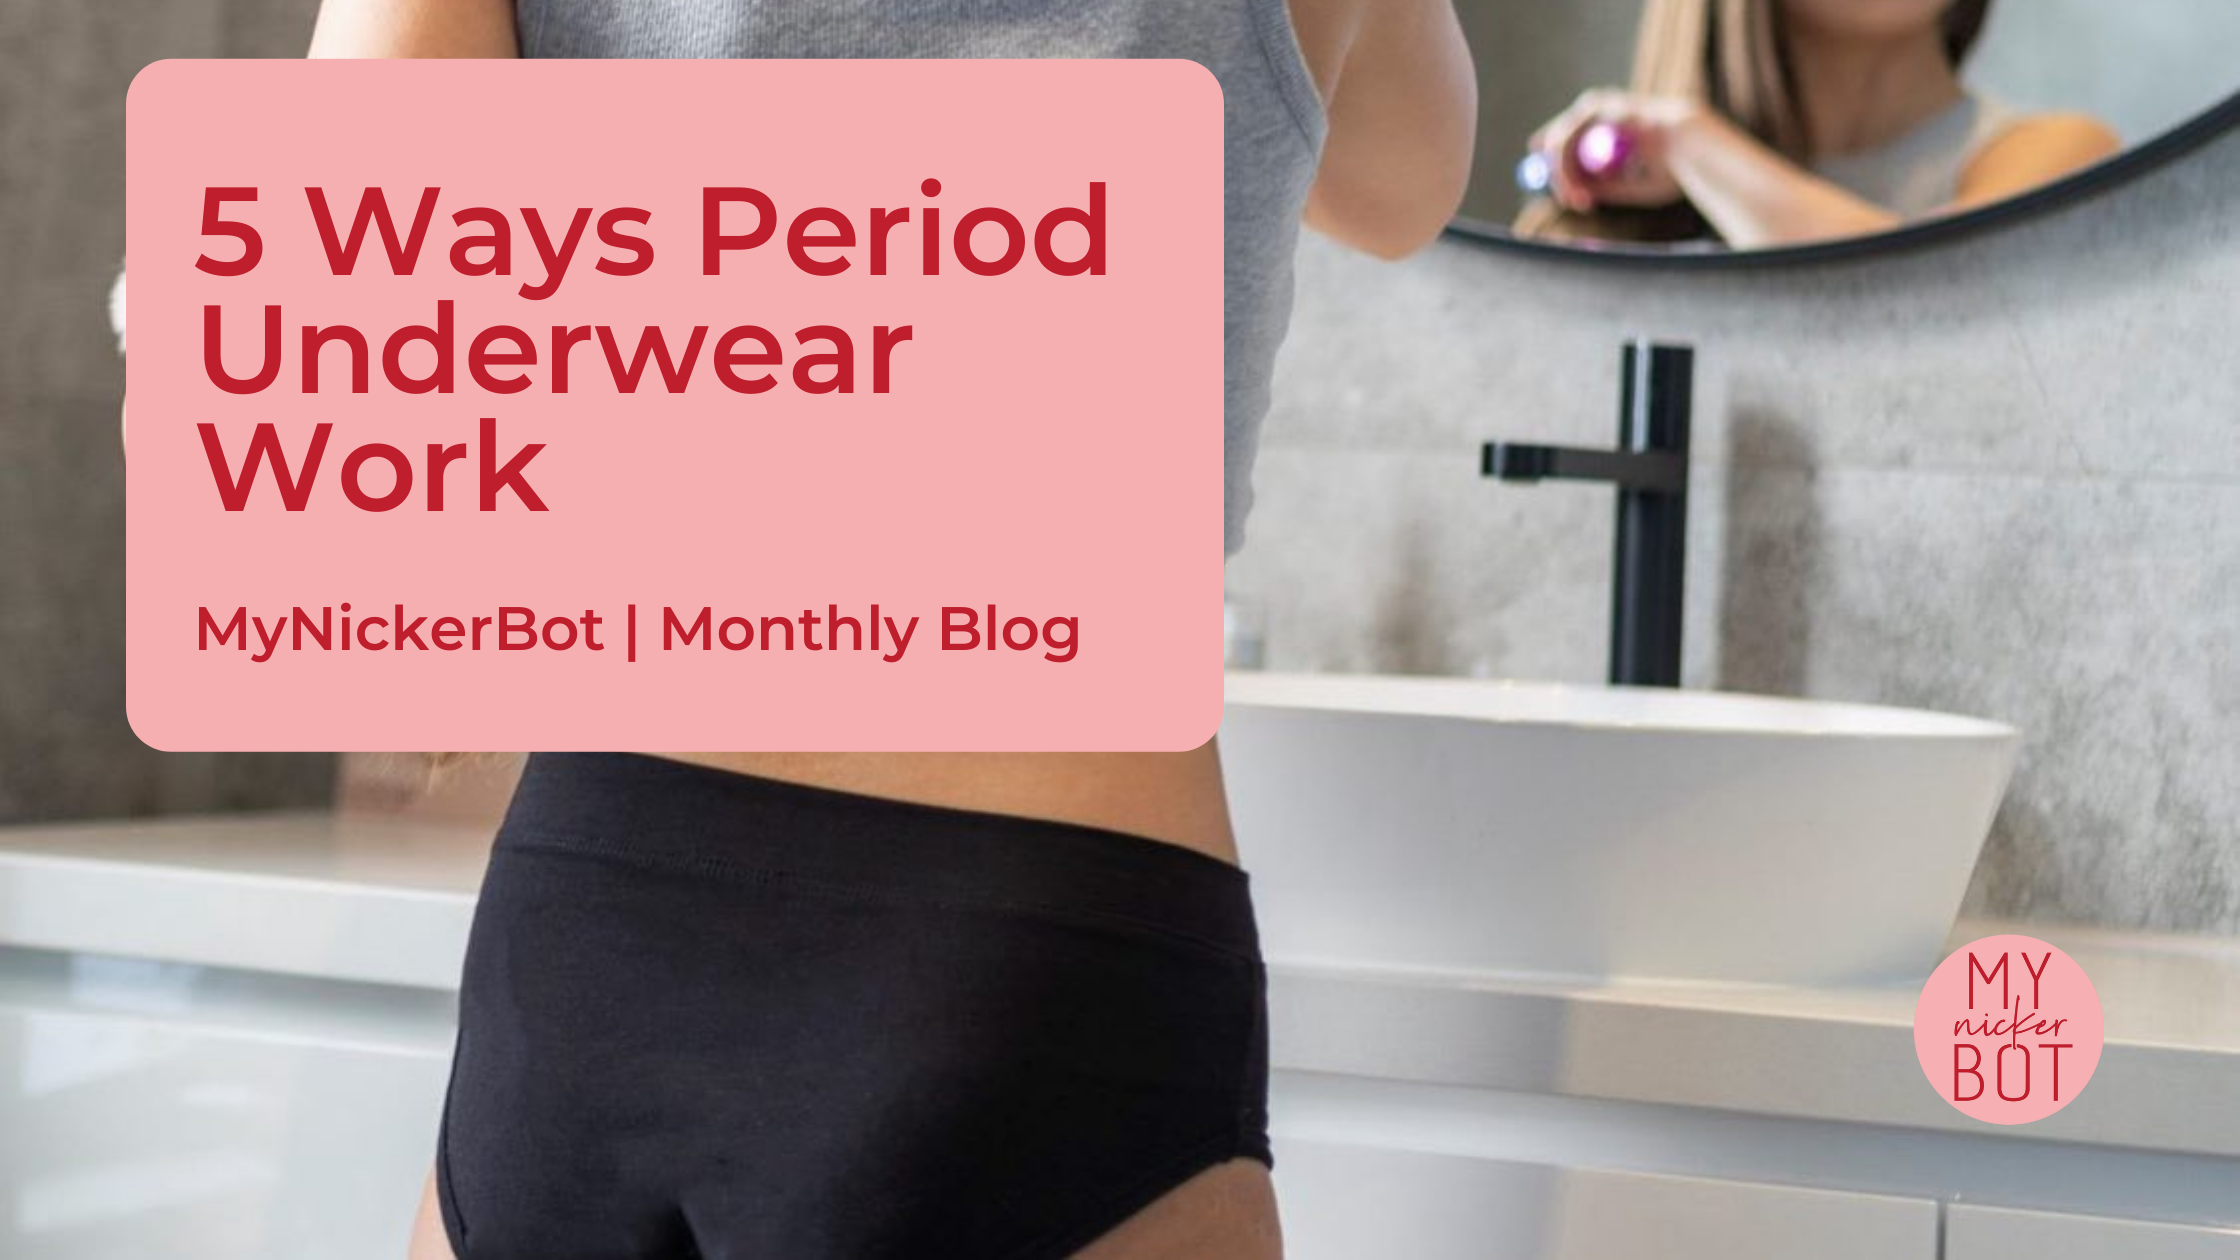 Can you wear period underwear all the time? – MyNickerBot